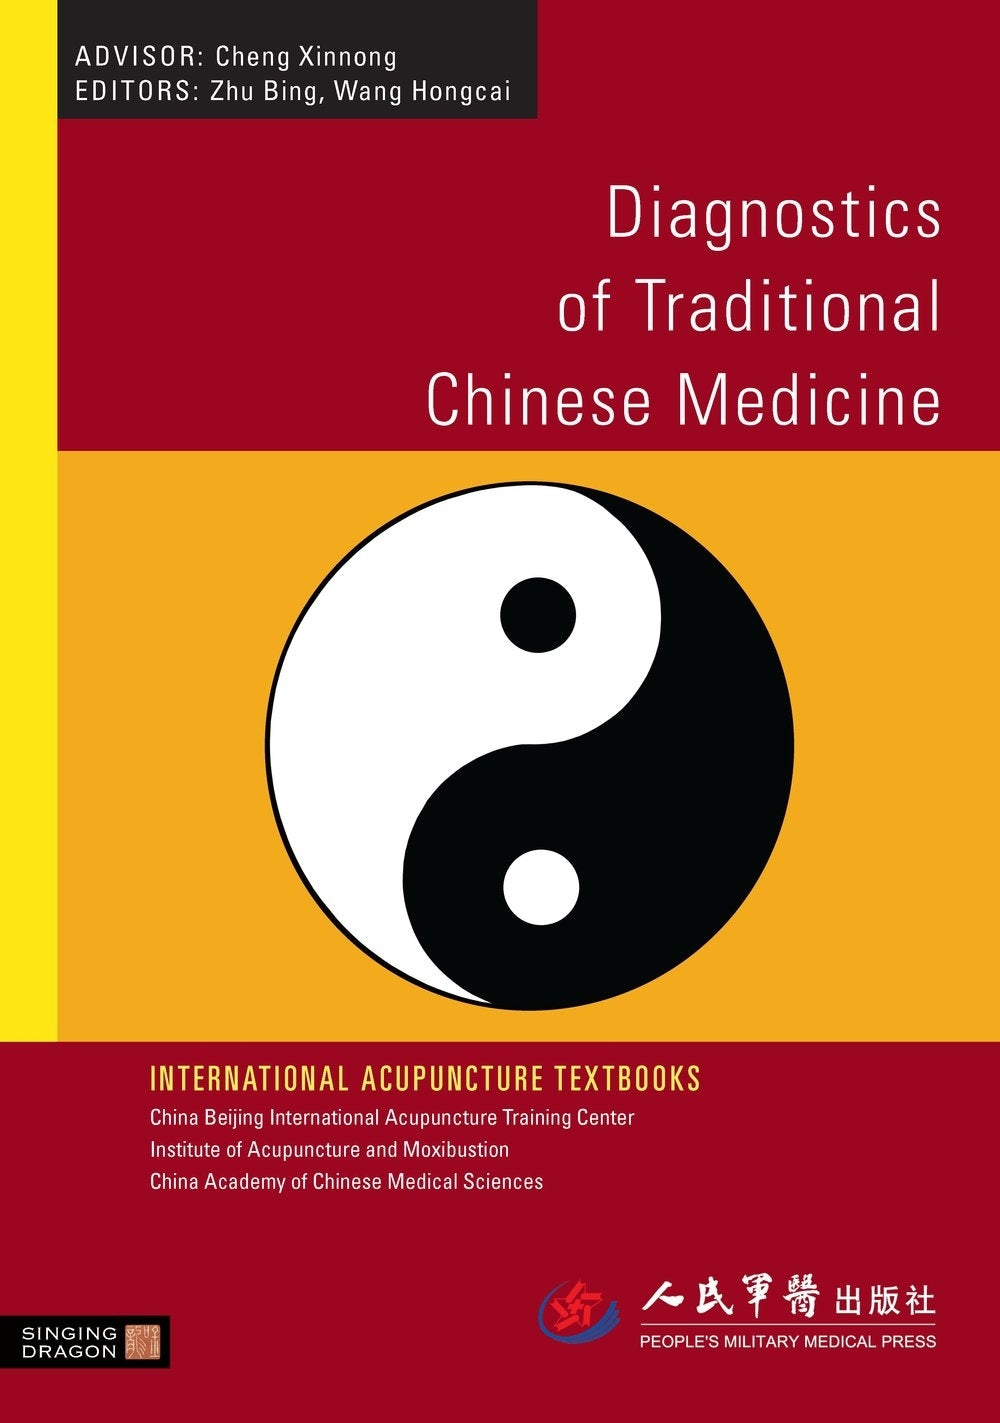 Diagnostics of Traditional Chinese Medicine by Bing Zhu, Hongcai Wang, No Author Listed